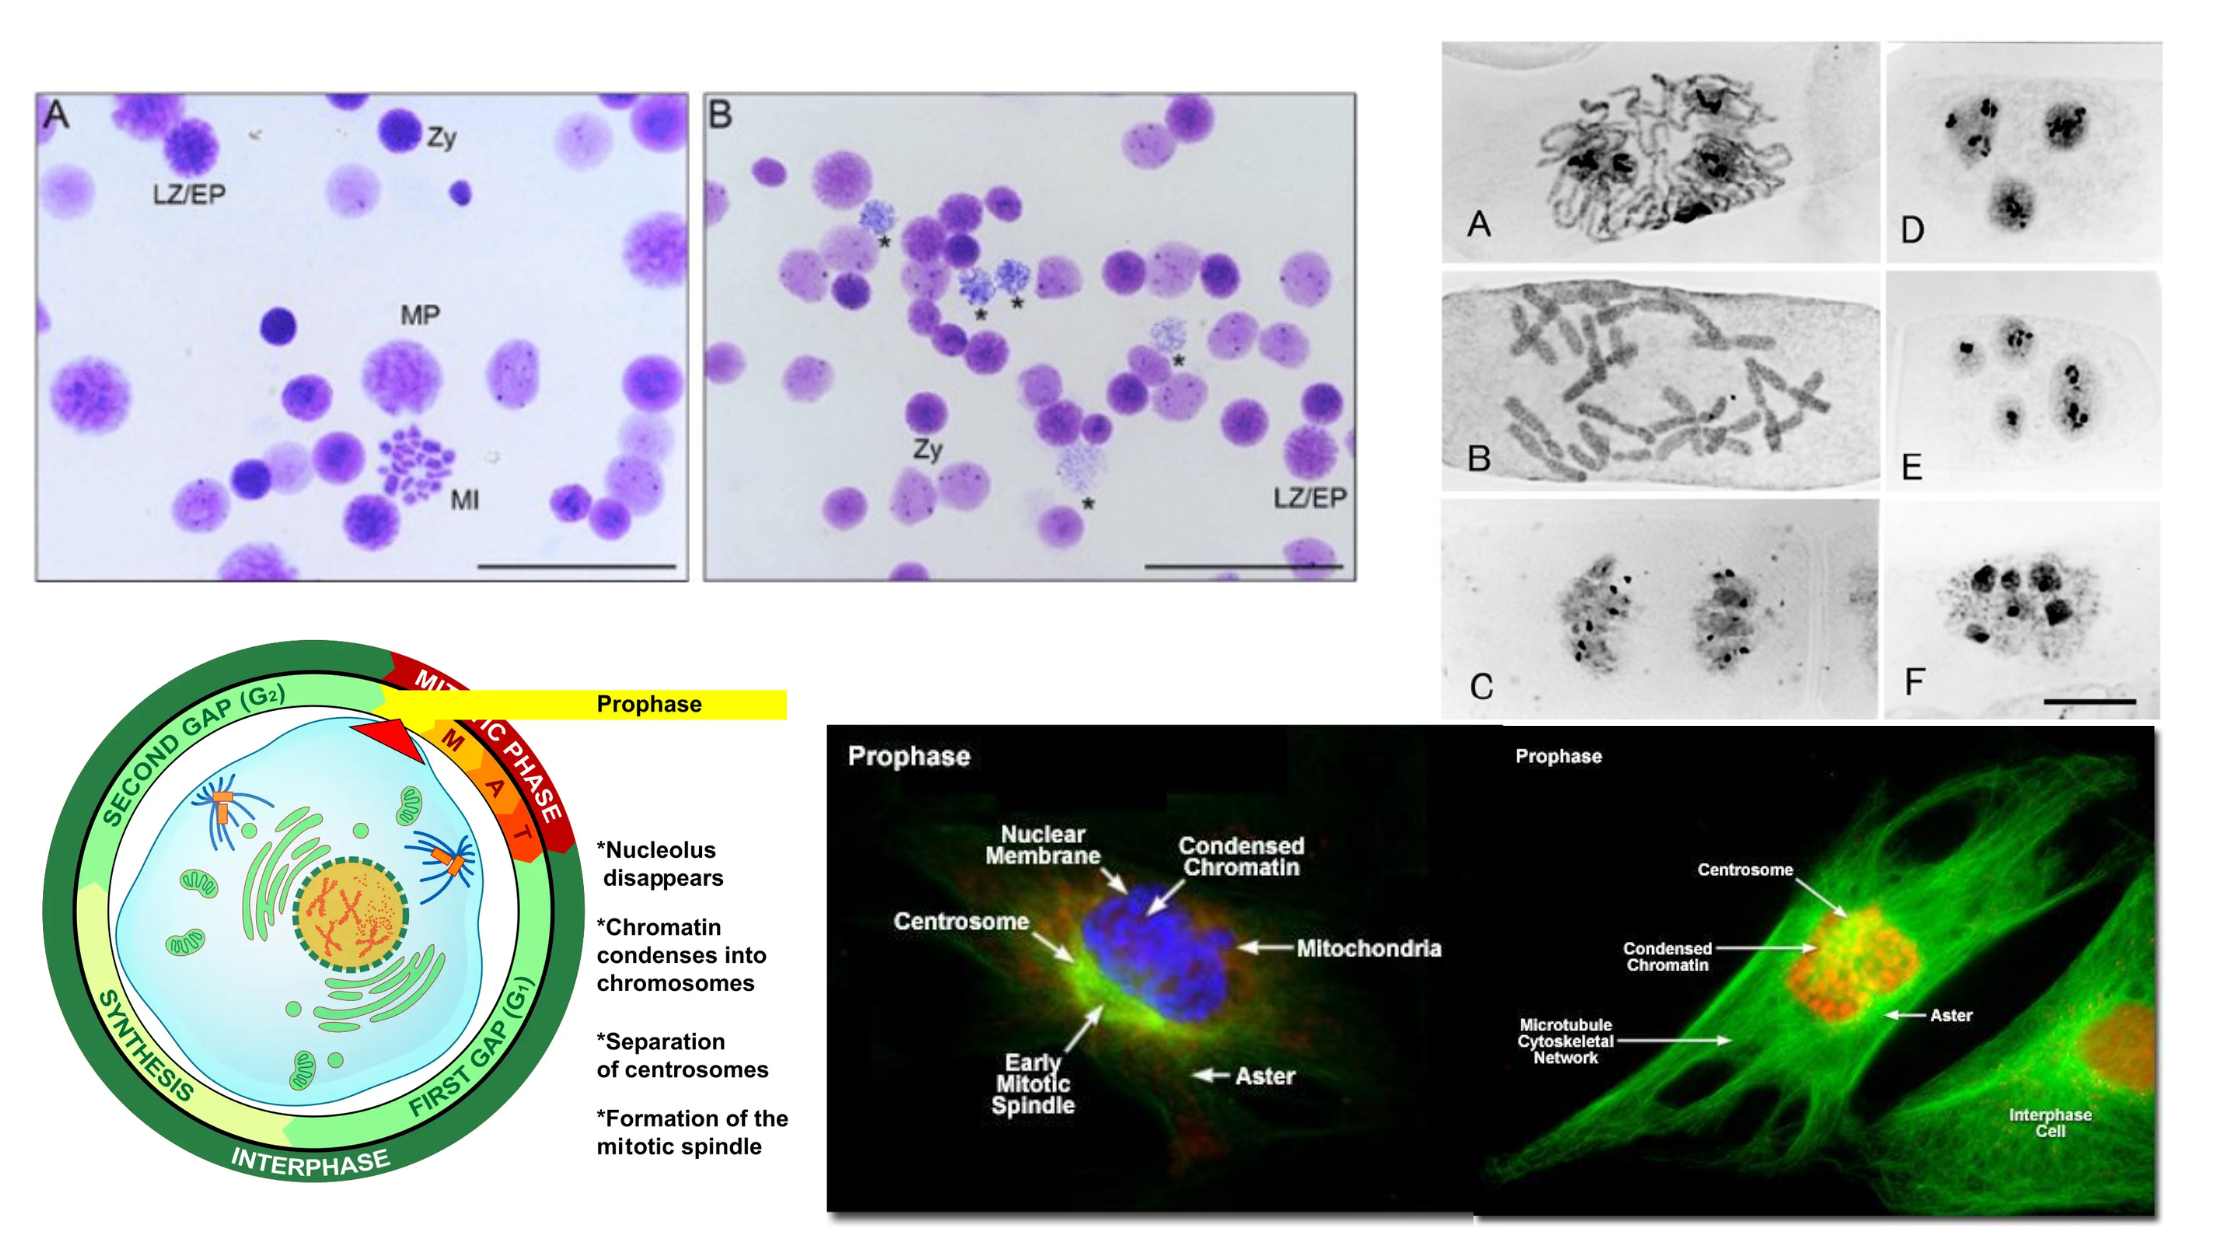 Prophase - Definition, Staining, Steps, Importance